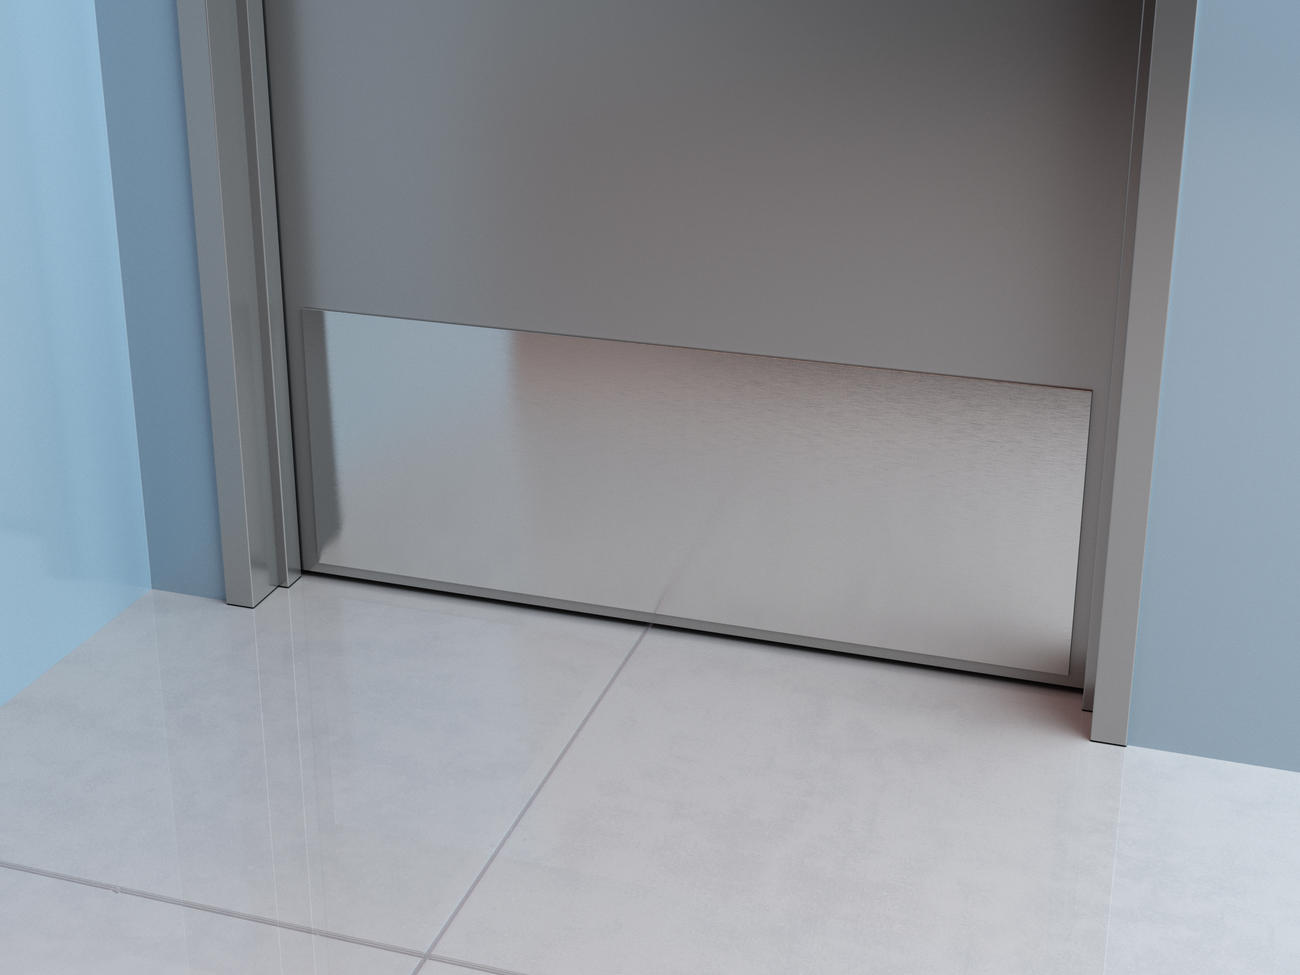 A bathroom door with a stainless steel corner guard.